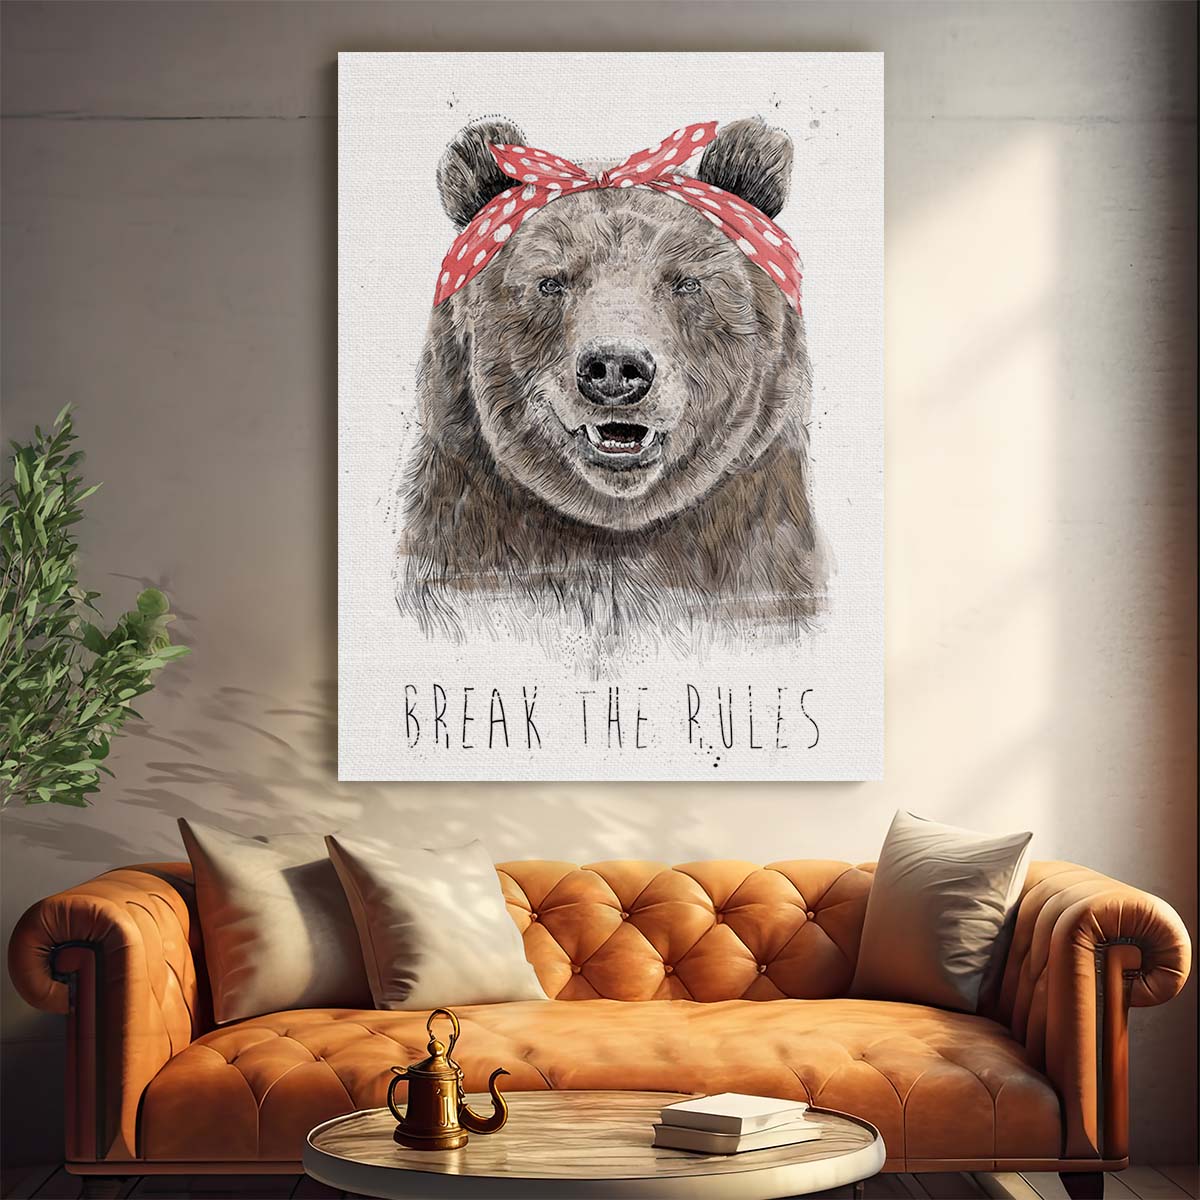 Rebellious Bear Humor Typography Illustration - Funny Animal Wall Art by Luxuriance Designs, made in USA